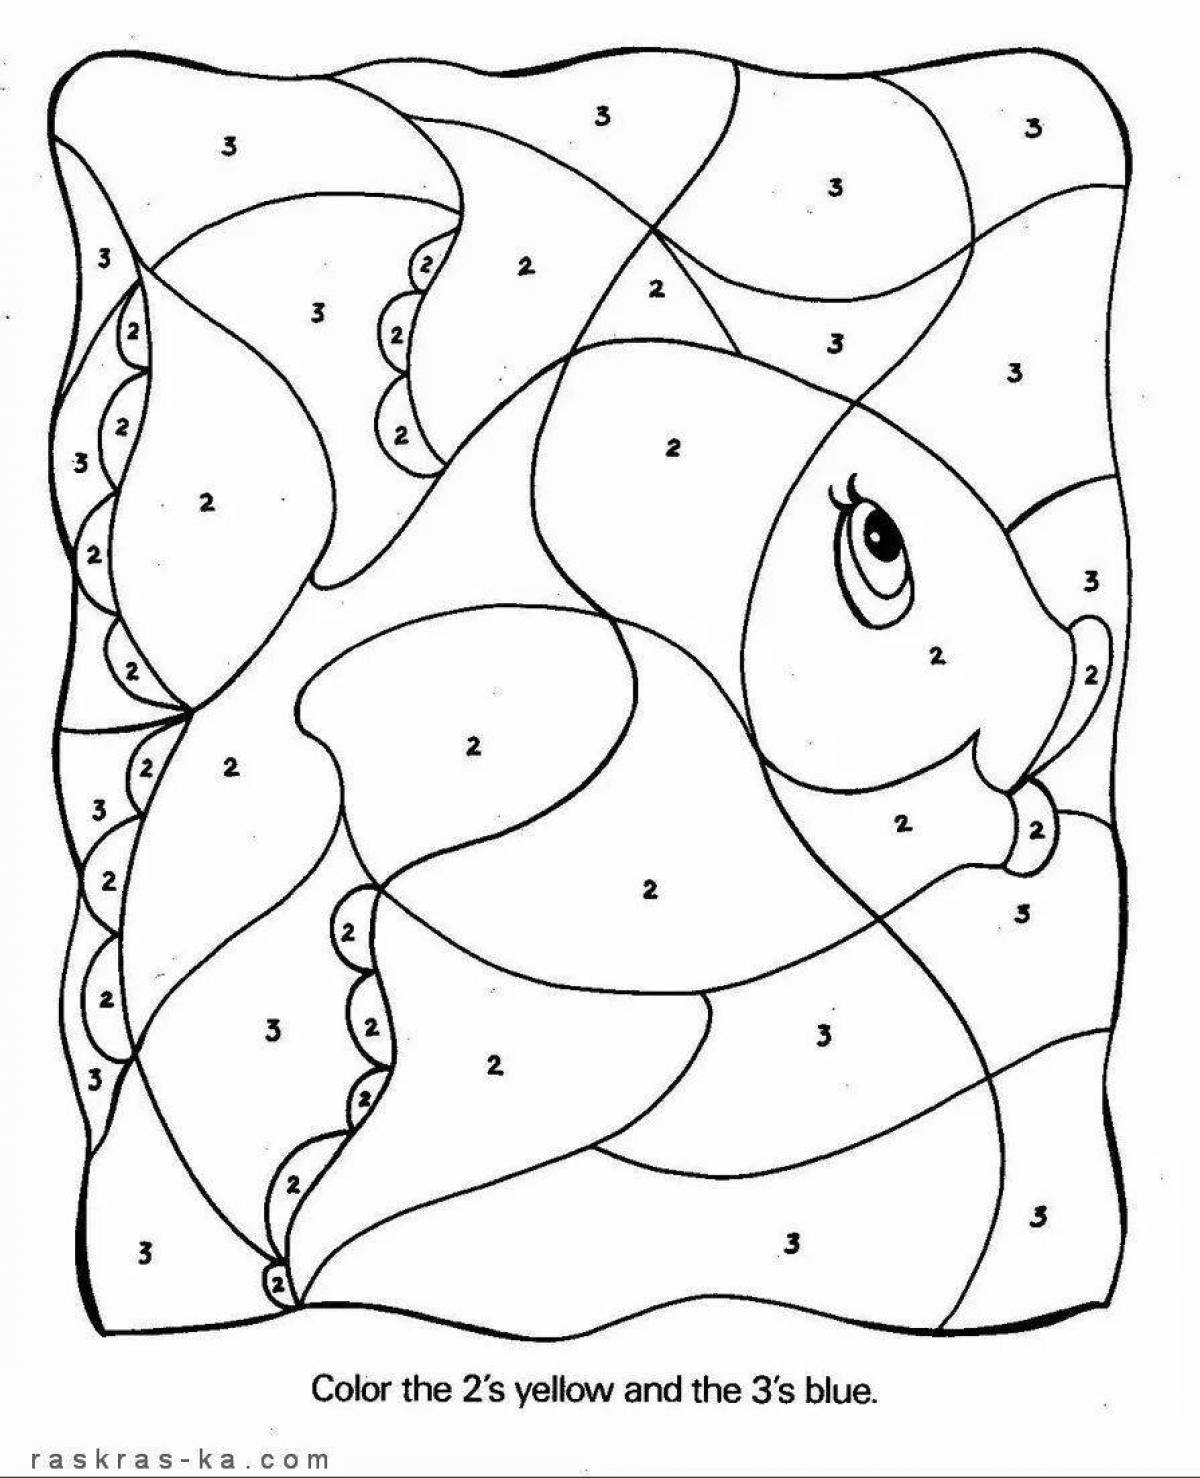 Joyful coloring by numbers for children 4 years old